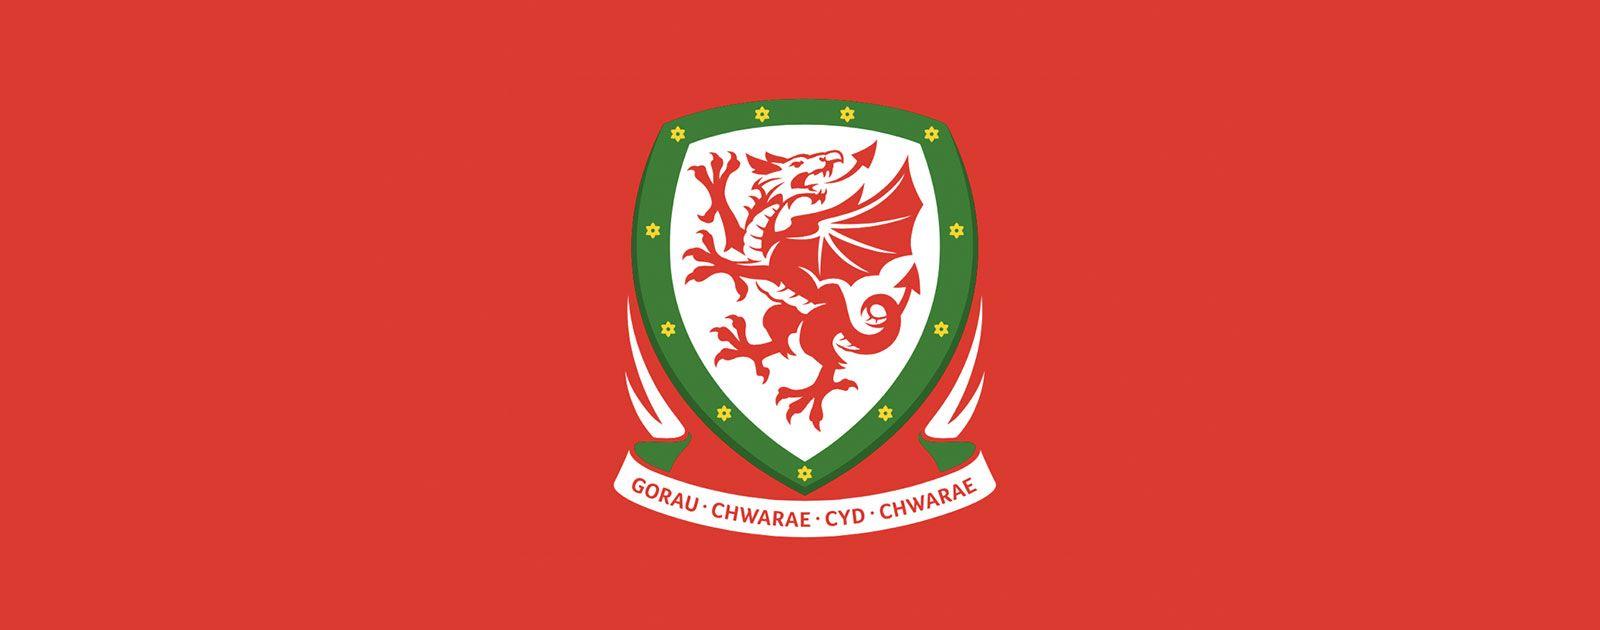 Wales Logo - Welcome to FAW Trust